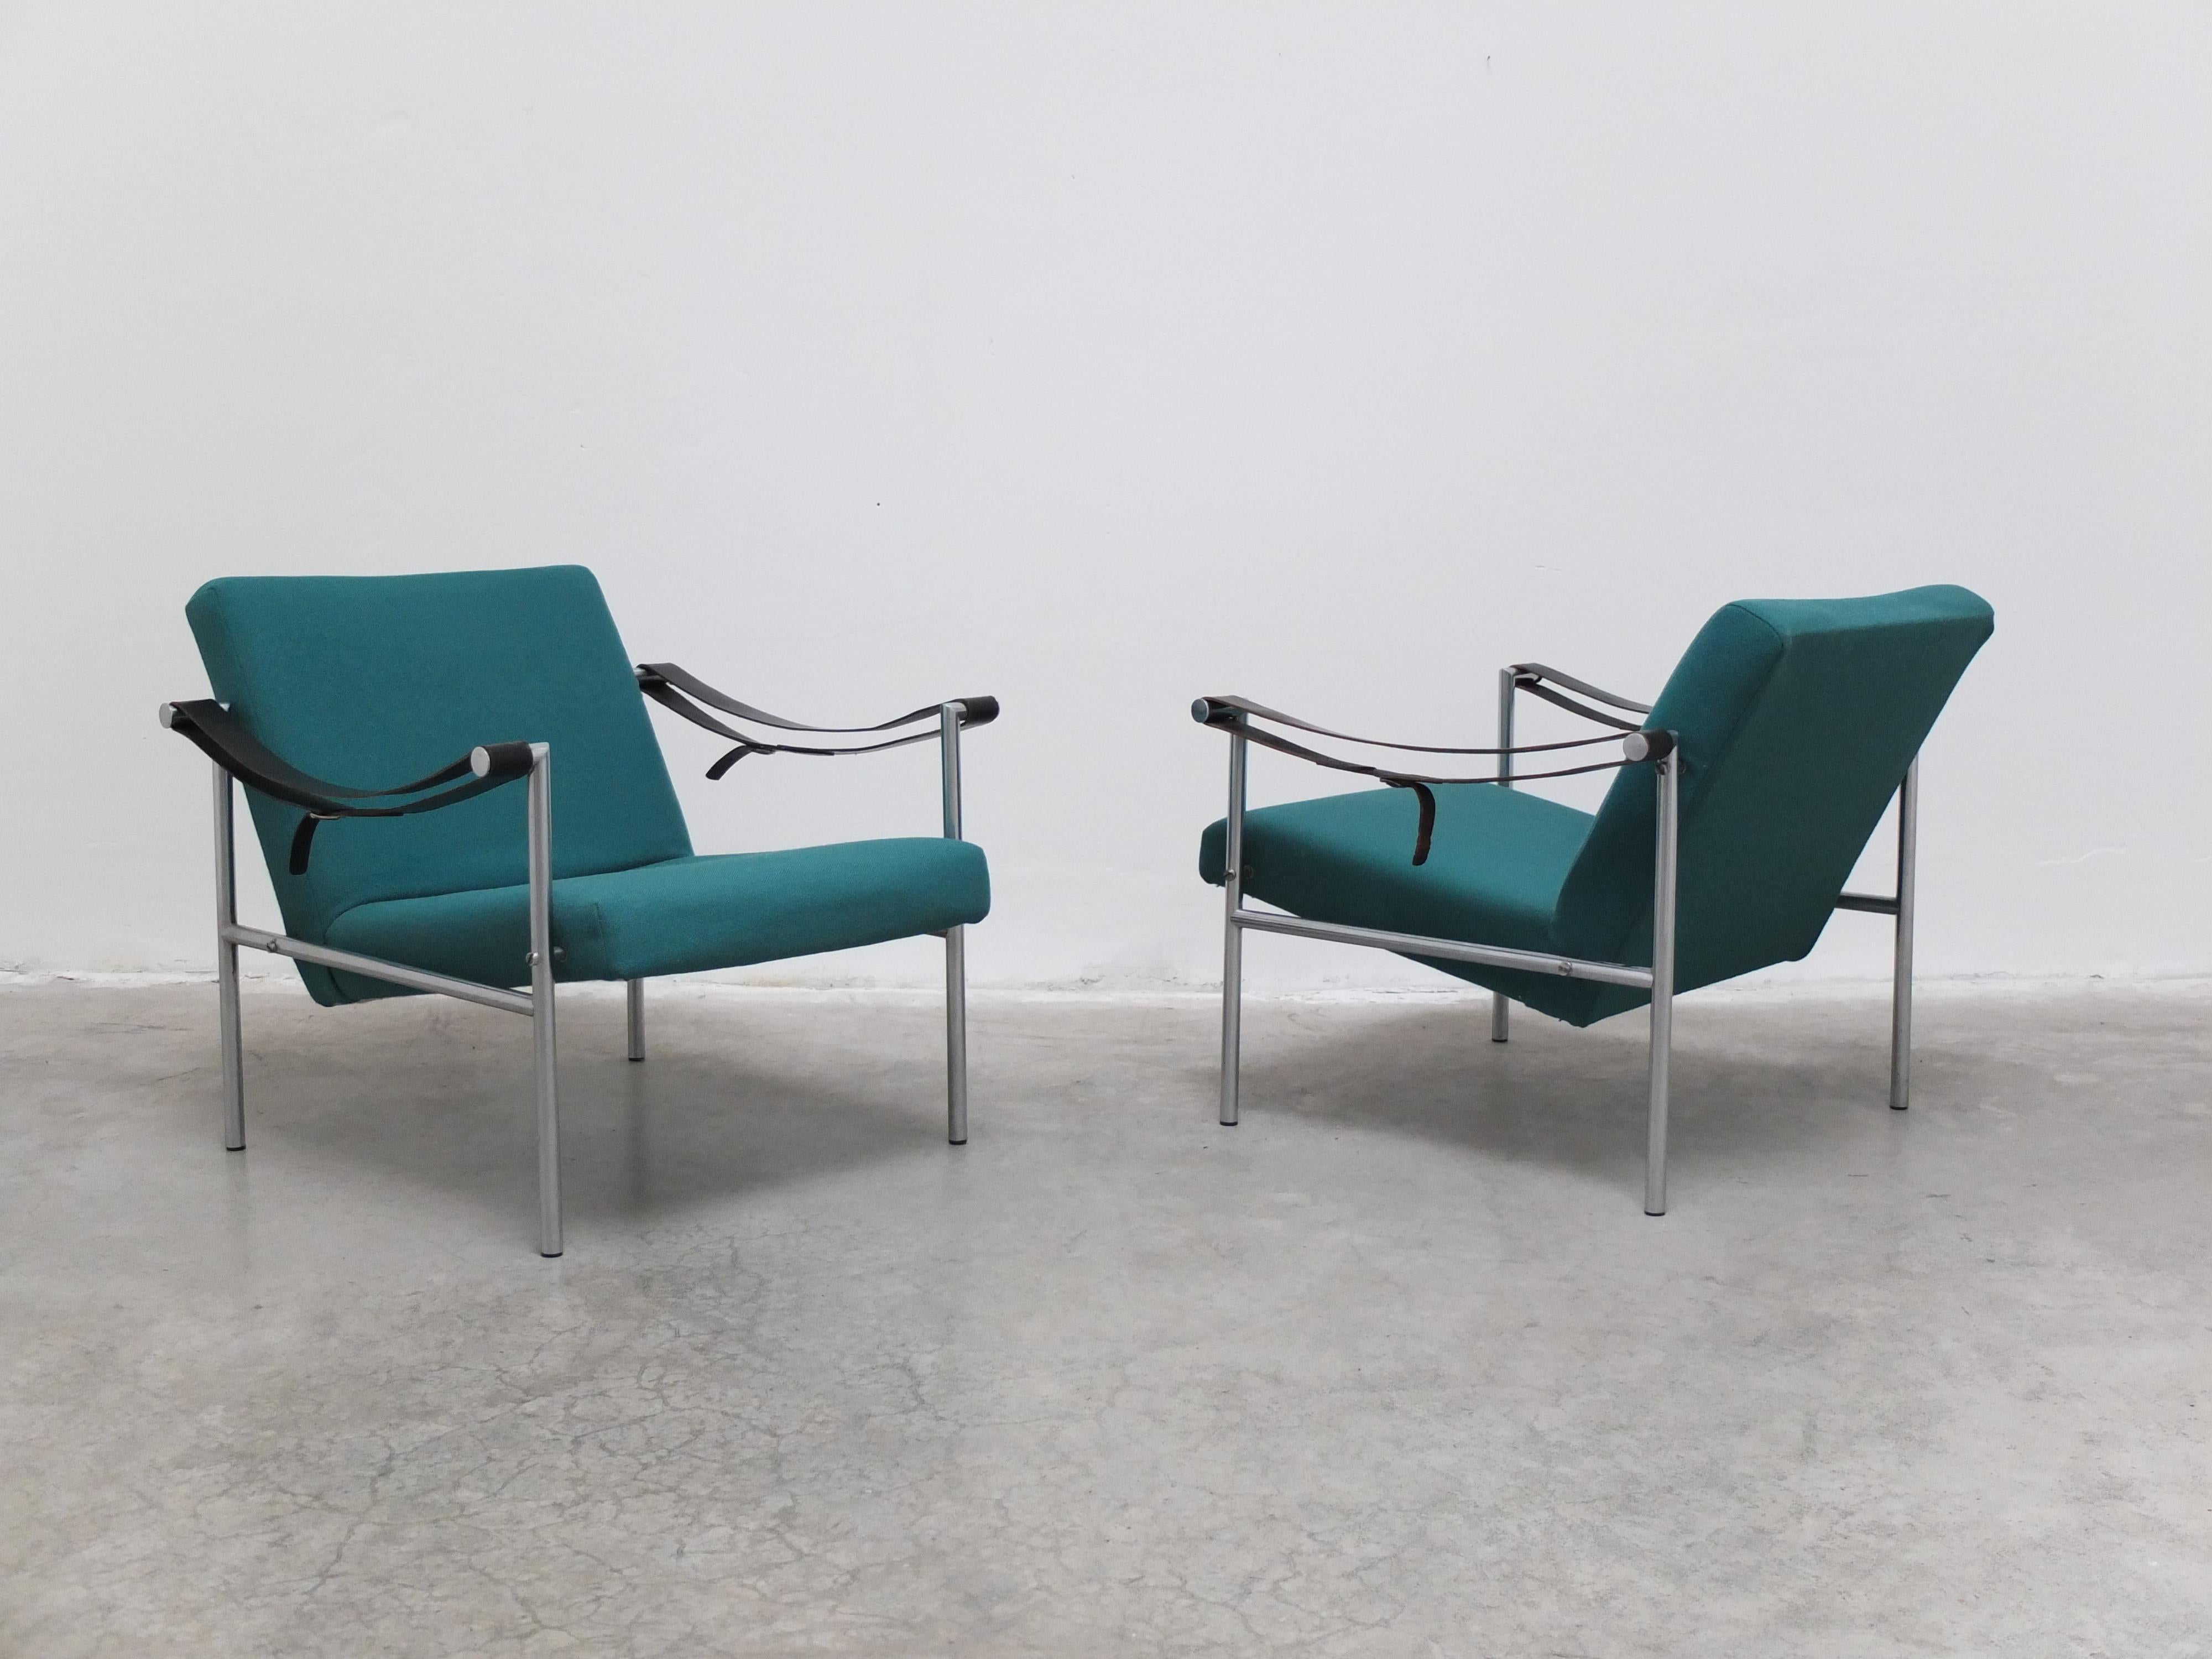 Pair of 'SZ08' Lounge Chairs by Martin Visser for 't Spectrum, 1960 For Sale 8